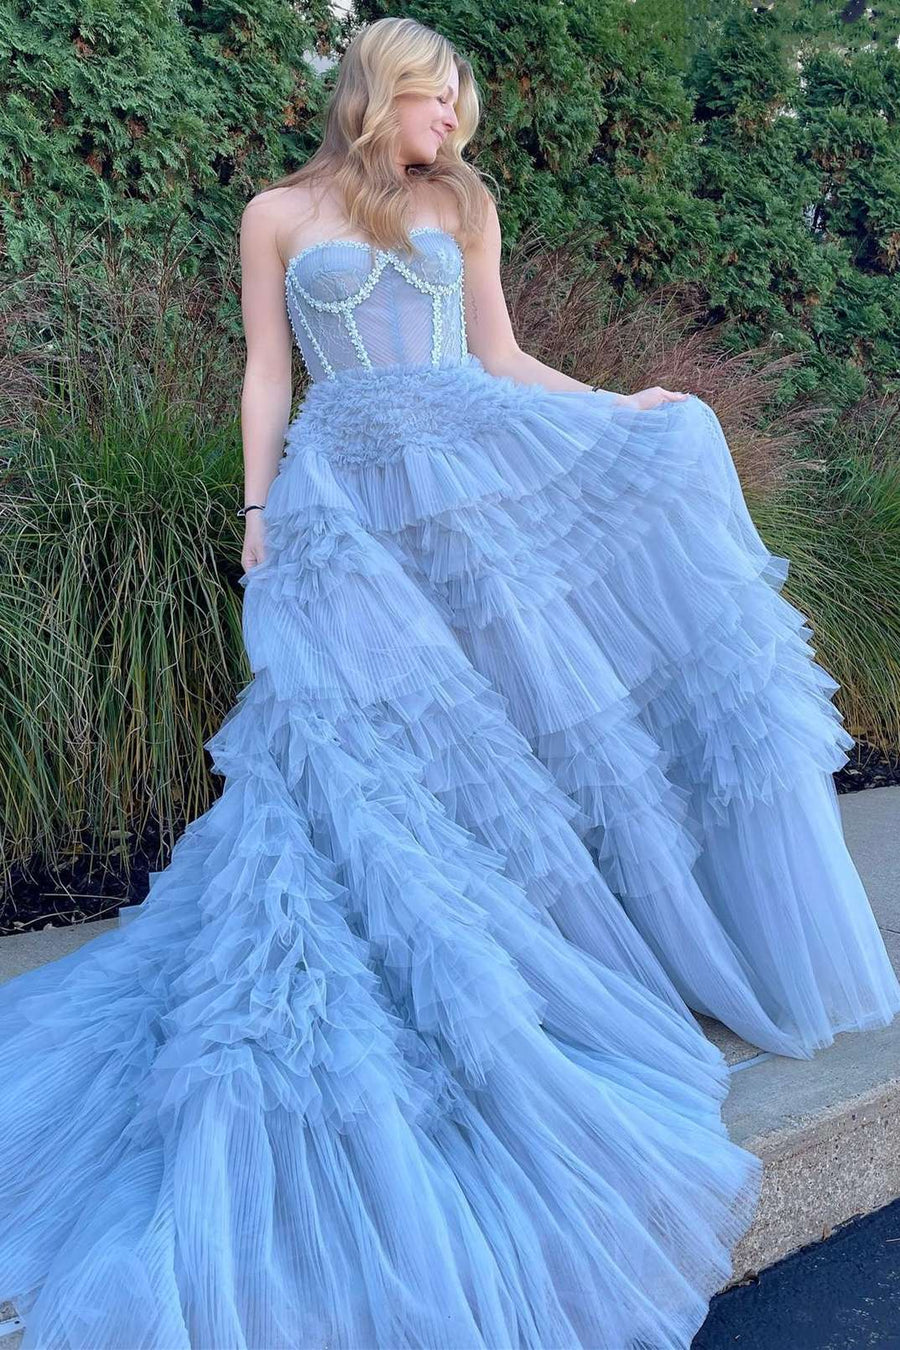 Princess Periwinkle Strapless Tiered Prom Gown